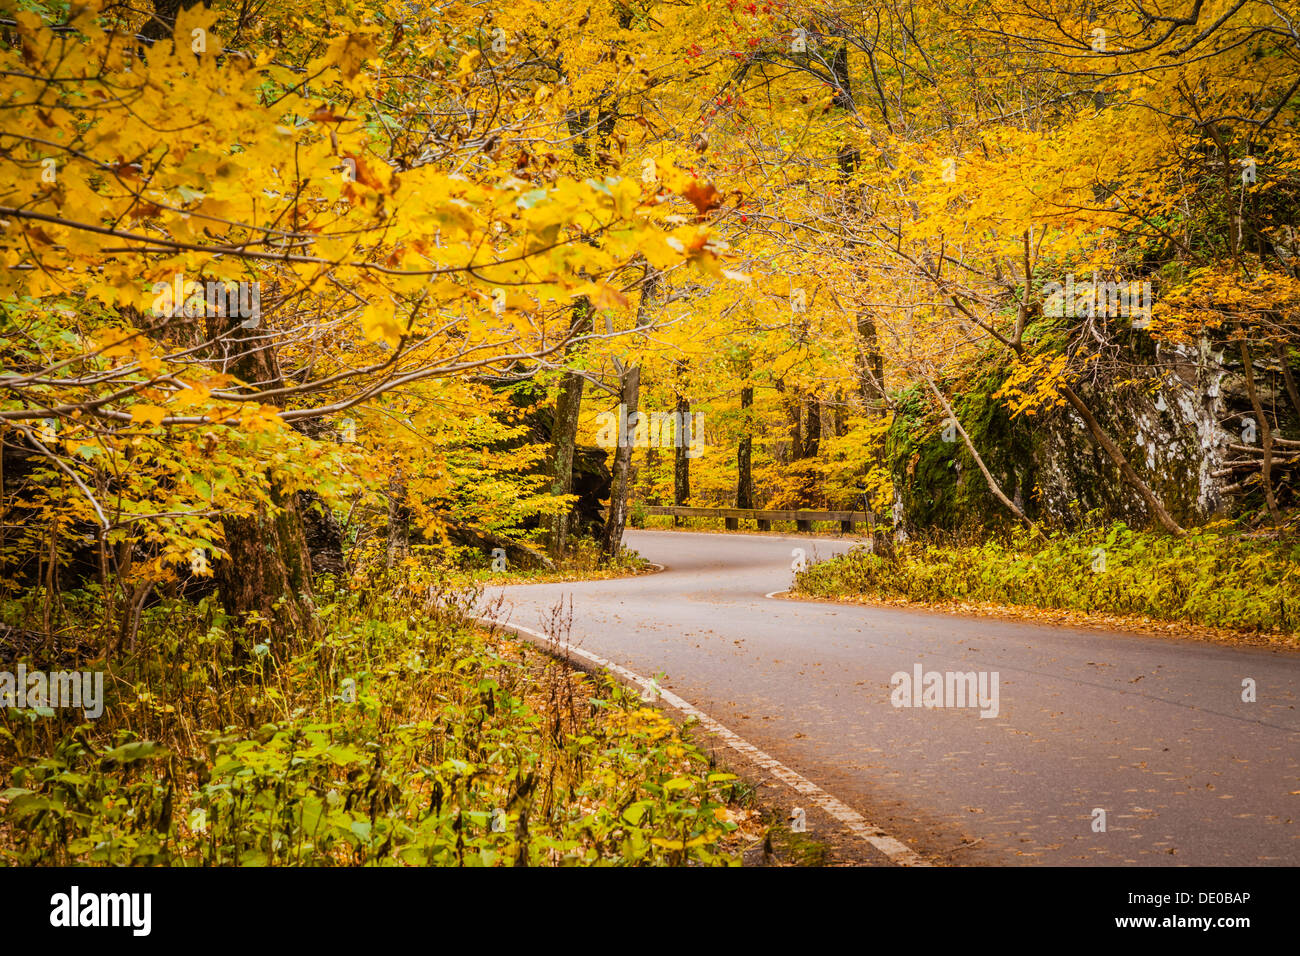 Curvy road in autumn near Smugglers Notch, Stowe, Vermont USA Stock Photo